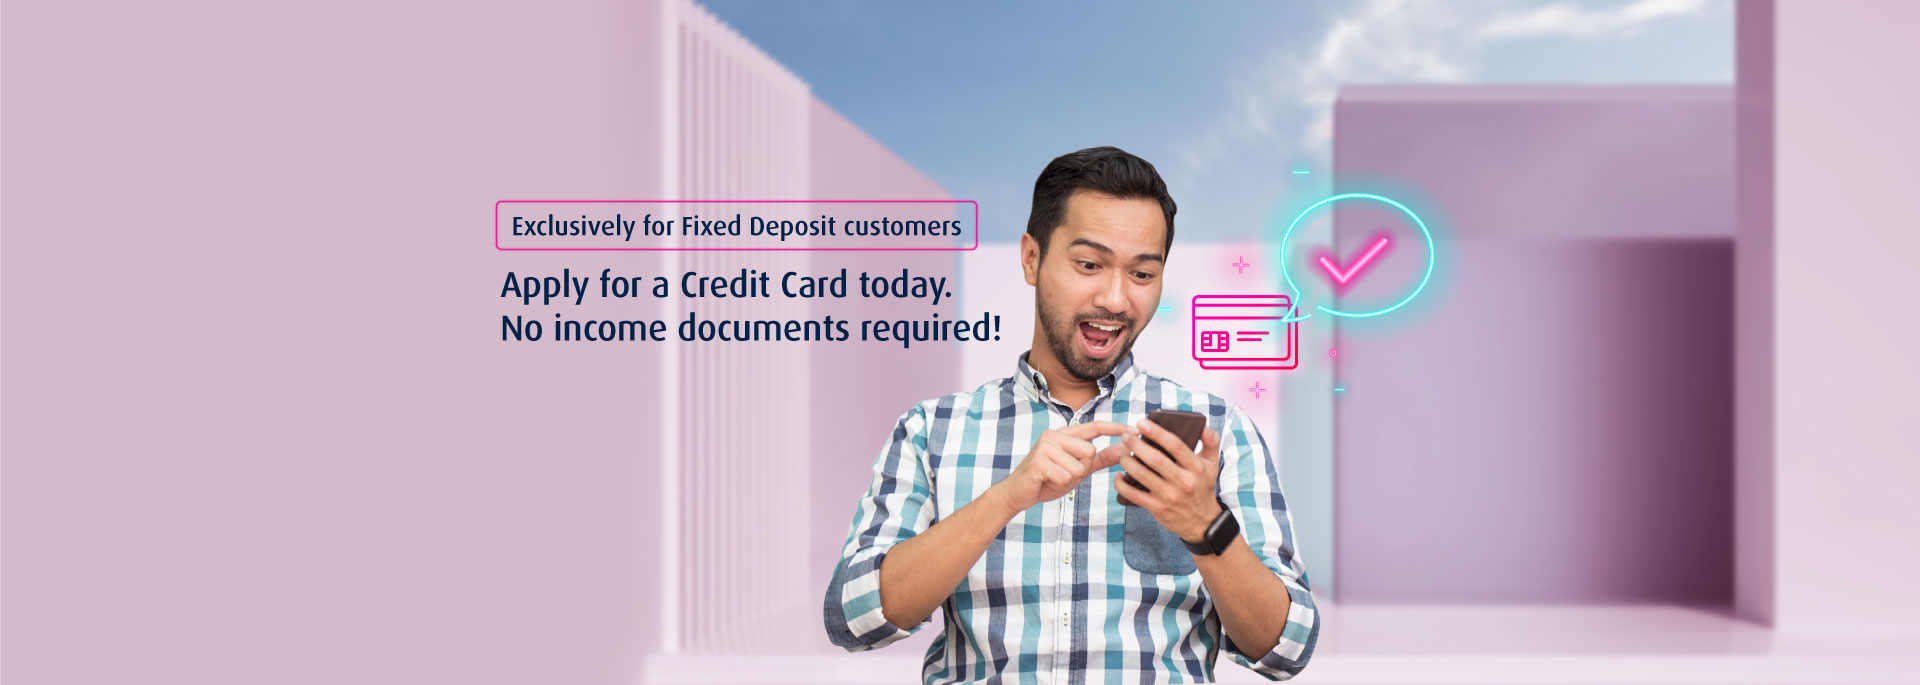 Apply for a Credit Card today. No income documents required!